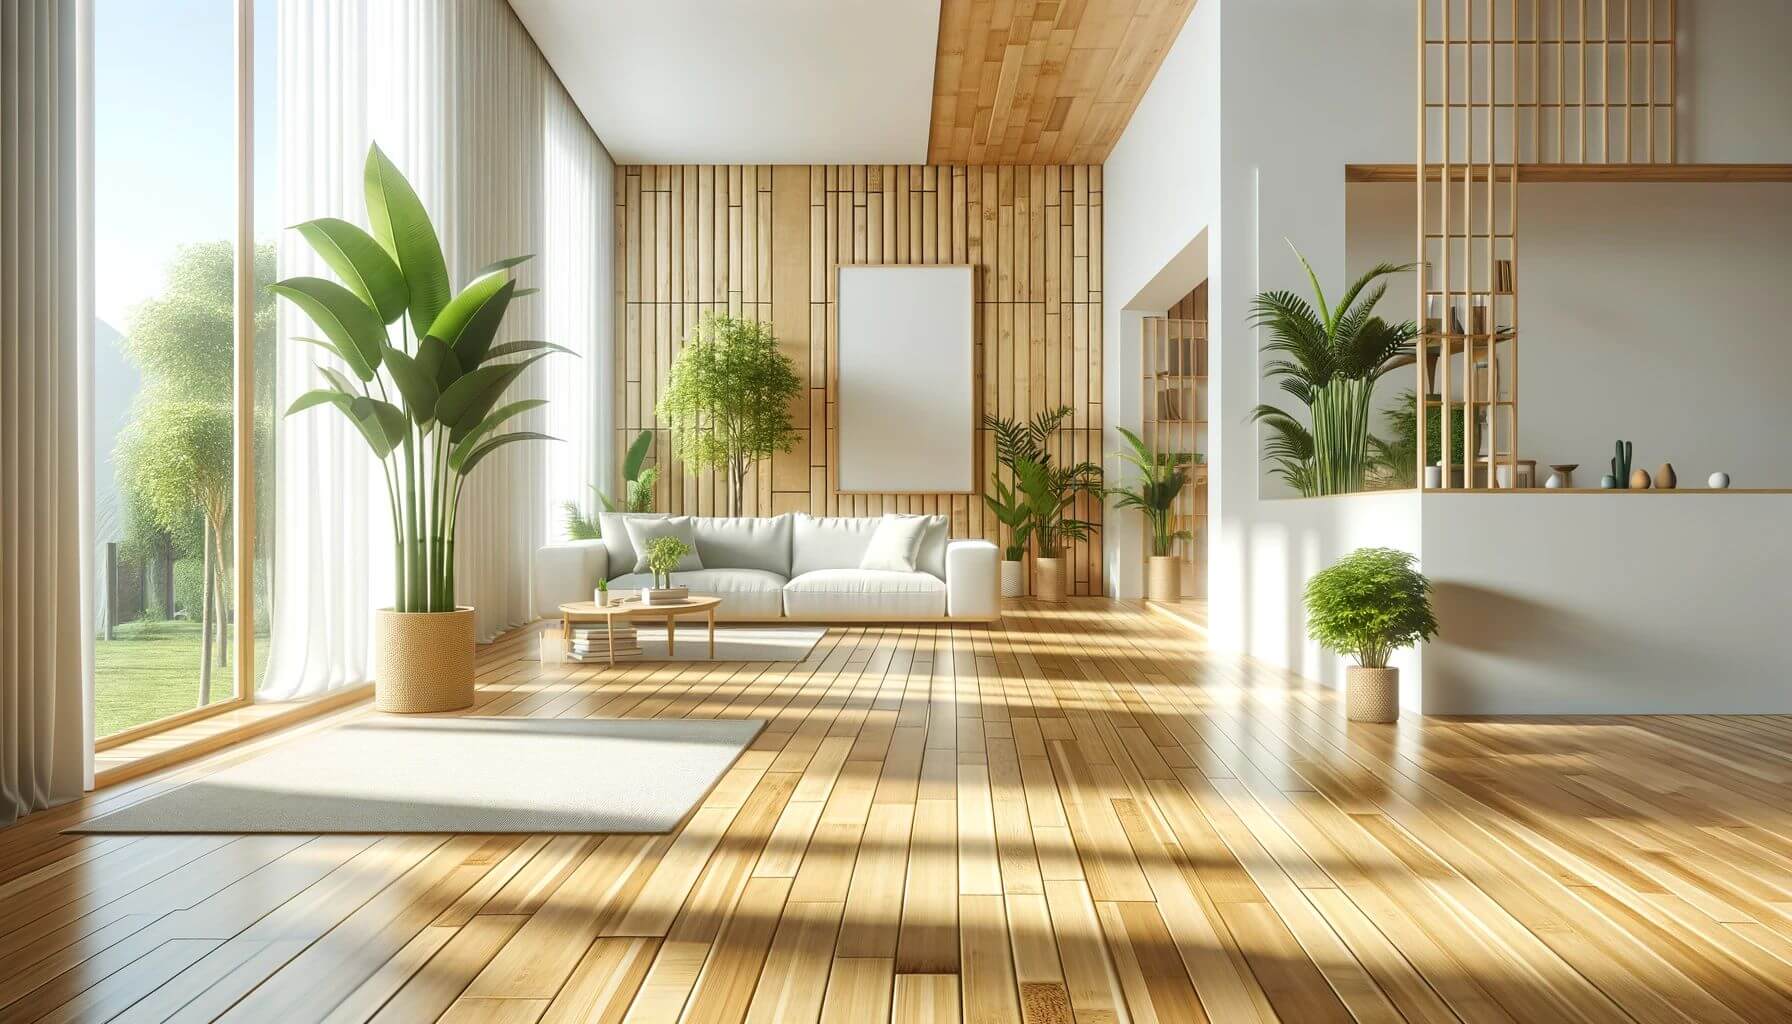 Bamboo Flooring in a Modern Living Room as an eco-friendly building materials